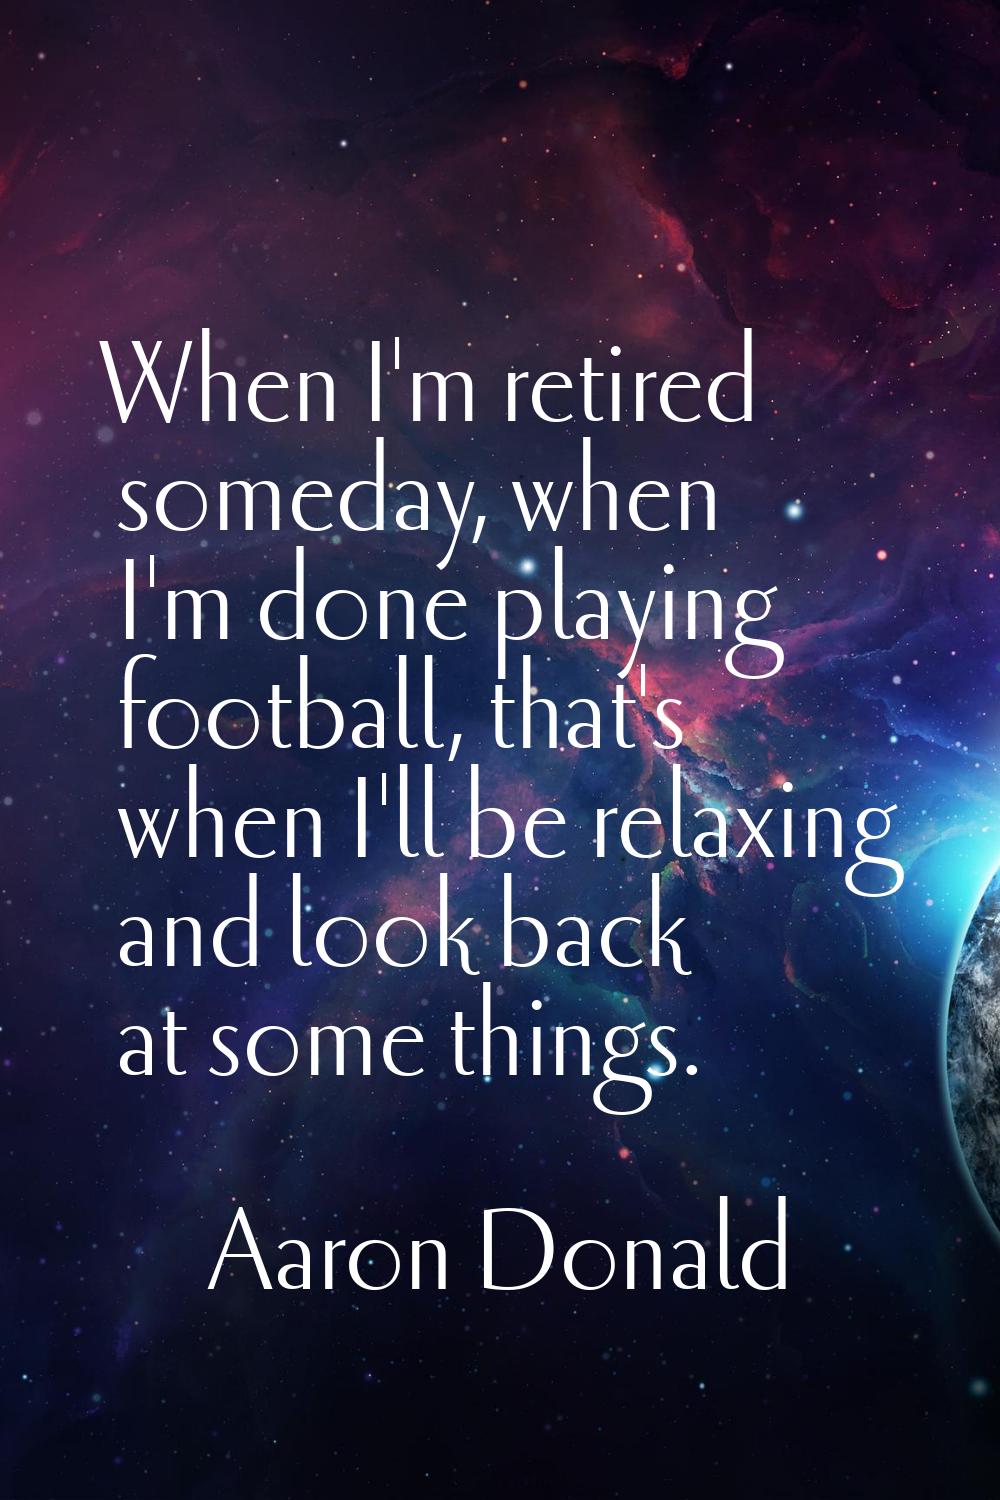 When I'm retired someday, when I'm done playing football, that's when I'll be relaxing and look bac